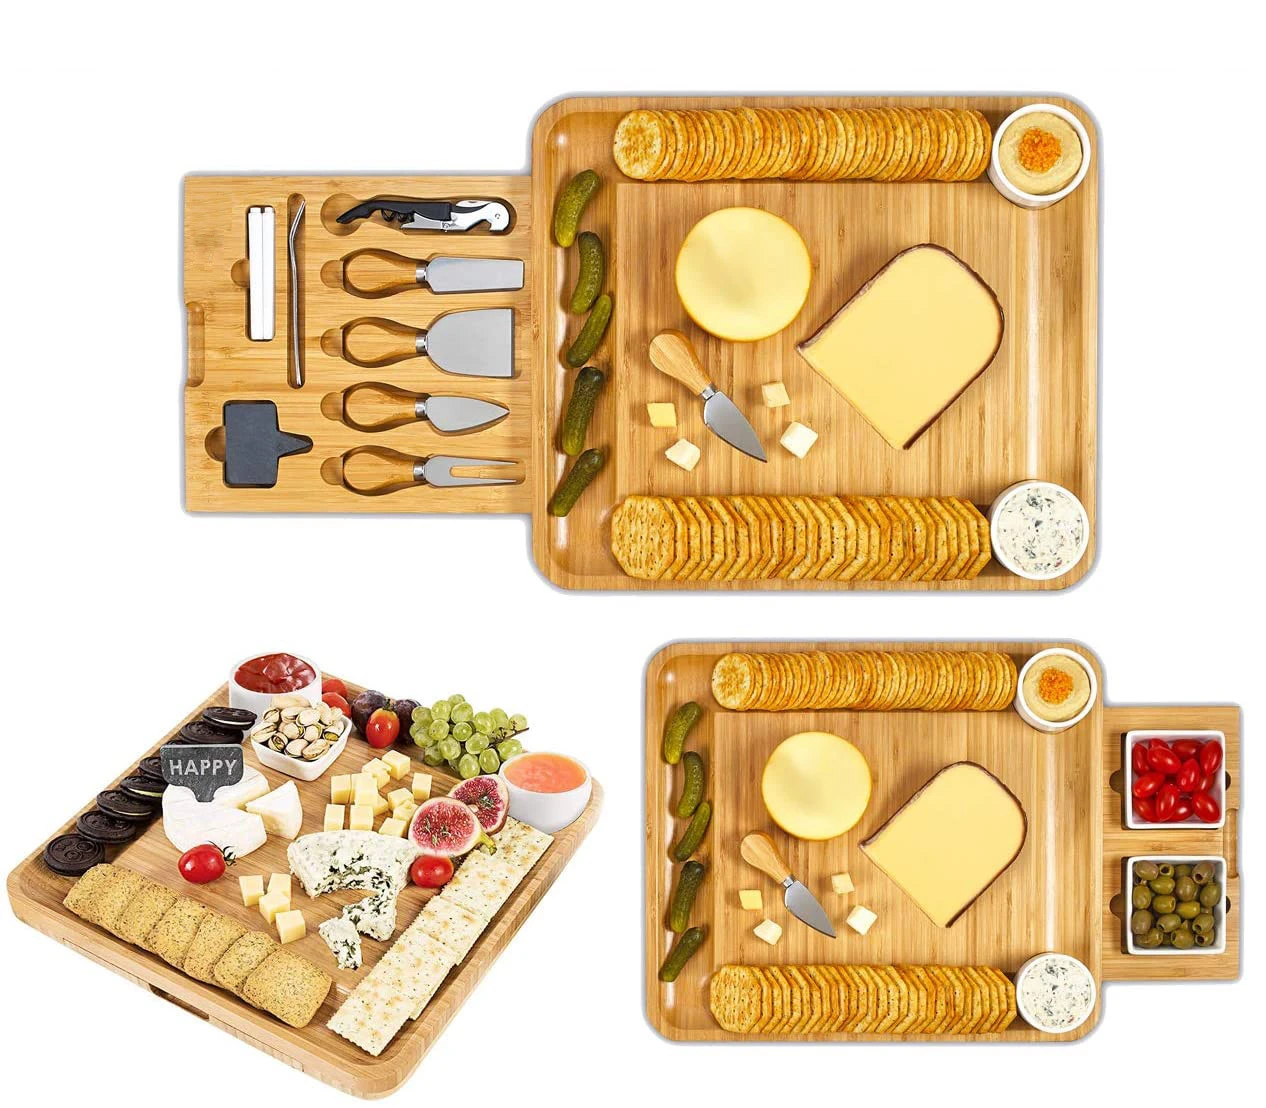 Cheese Board 2 Ceramic Bowls 2 Serving Plates  Magnetic 2 Drawers Bamboo Charcuterie Cutlery Knife Set